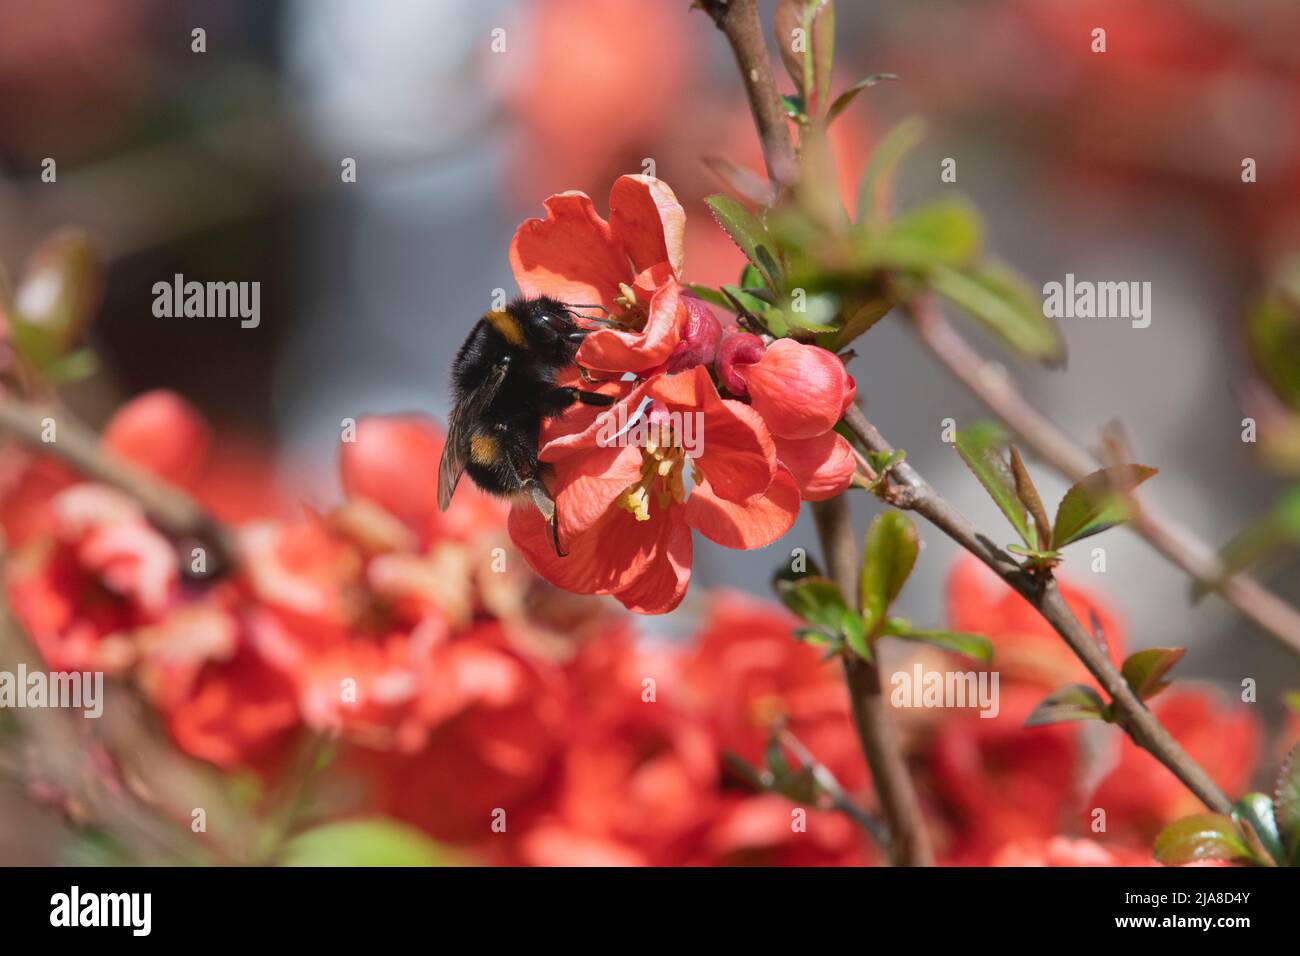 A Buff-Tailed Bumblebee (Bombus Terrestris) Feeding on the Orange Flowers of Japanese Quince, or Ornamental Quince, (Chaenomeles Japonica) in Spring Stock Photo